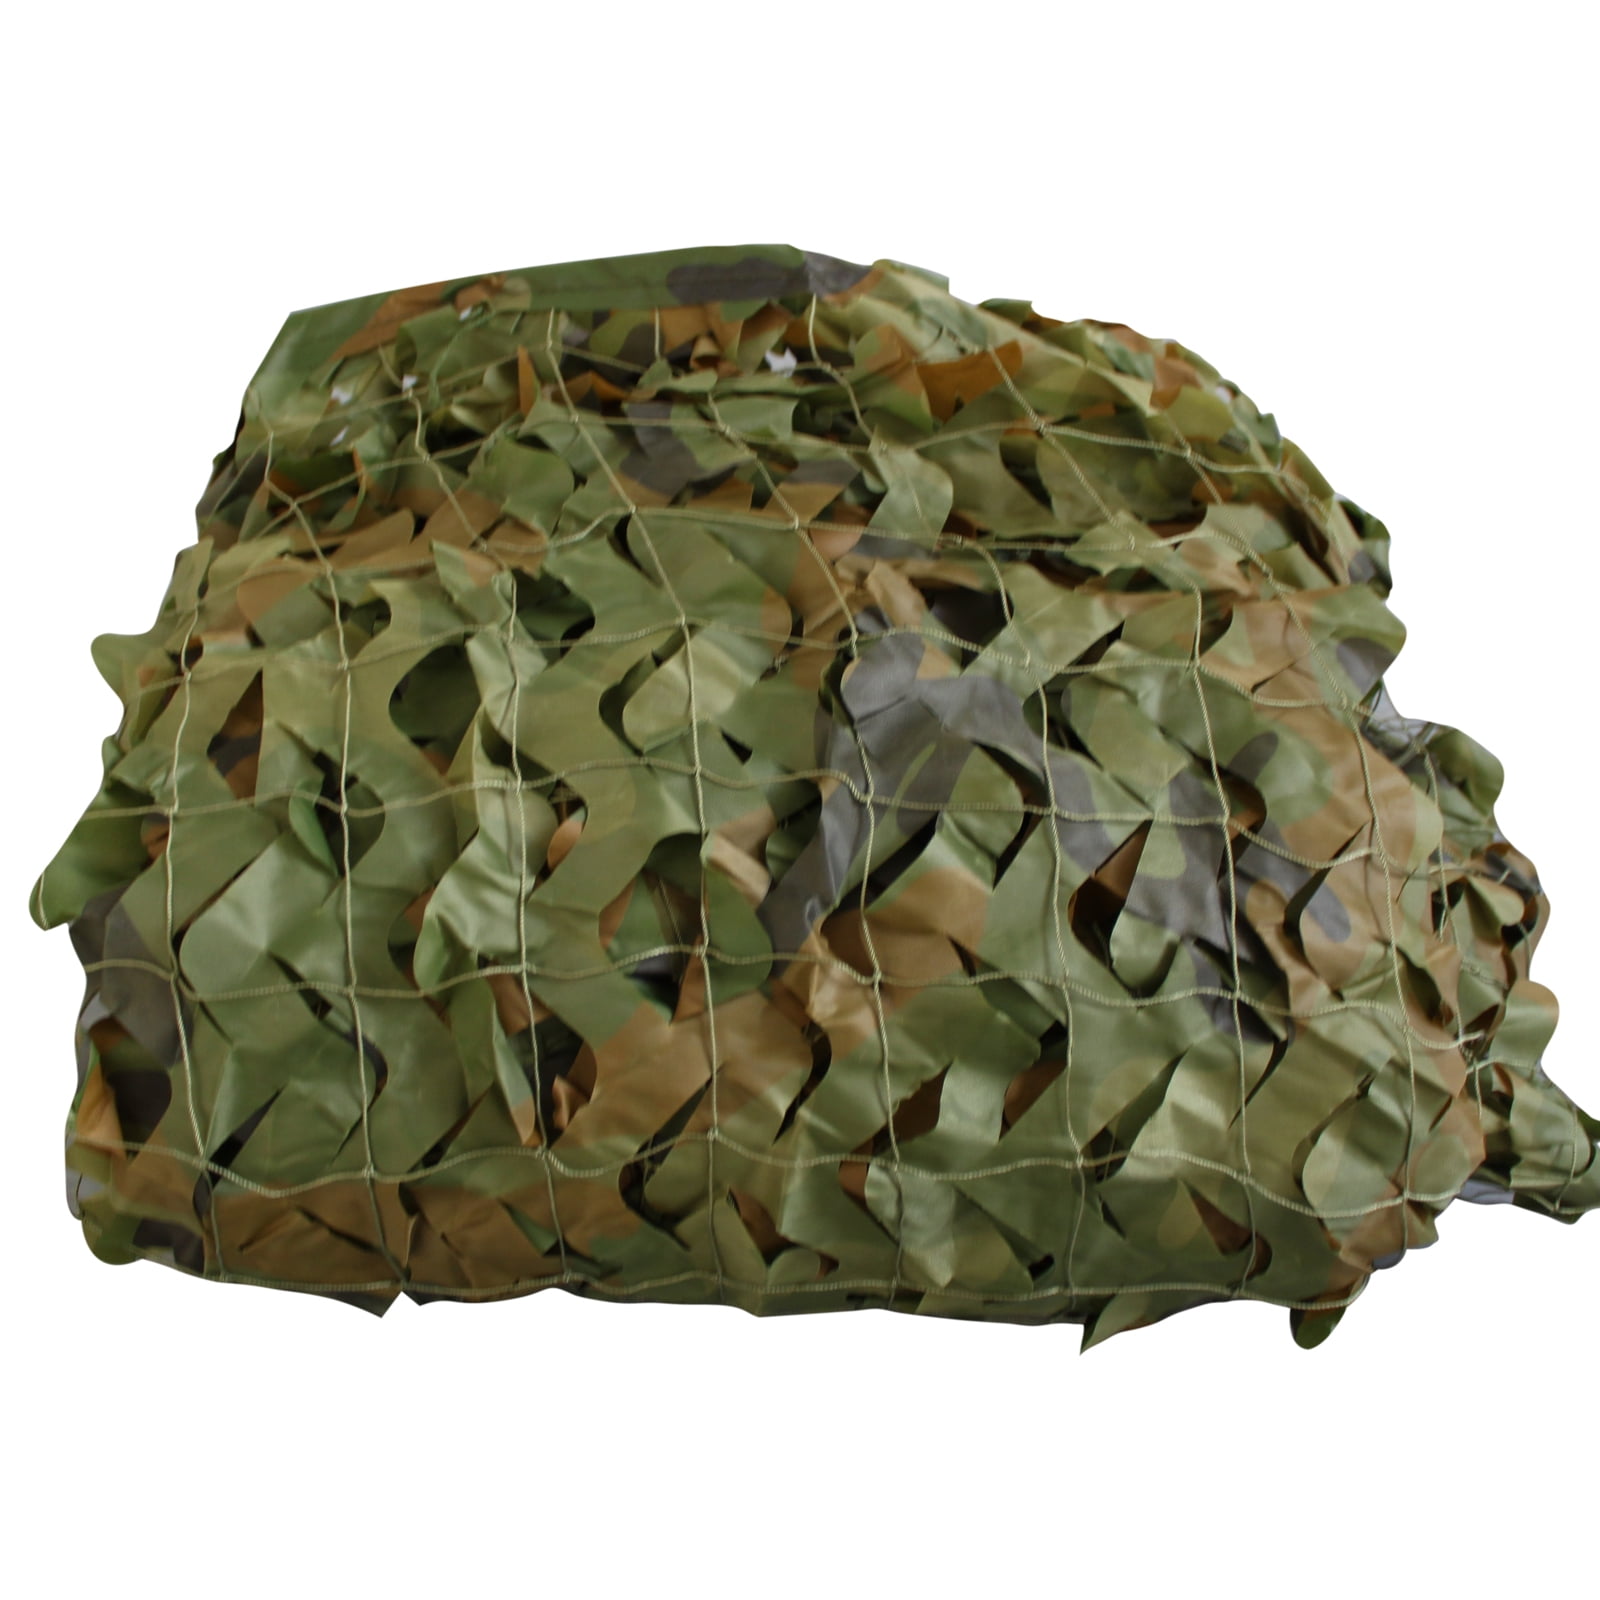 Details about   Camouflage Camo Net Netting Camping Hunting Woodland Leaves Fabric Waterproof 